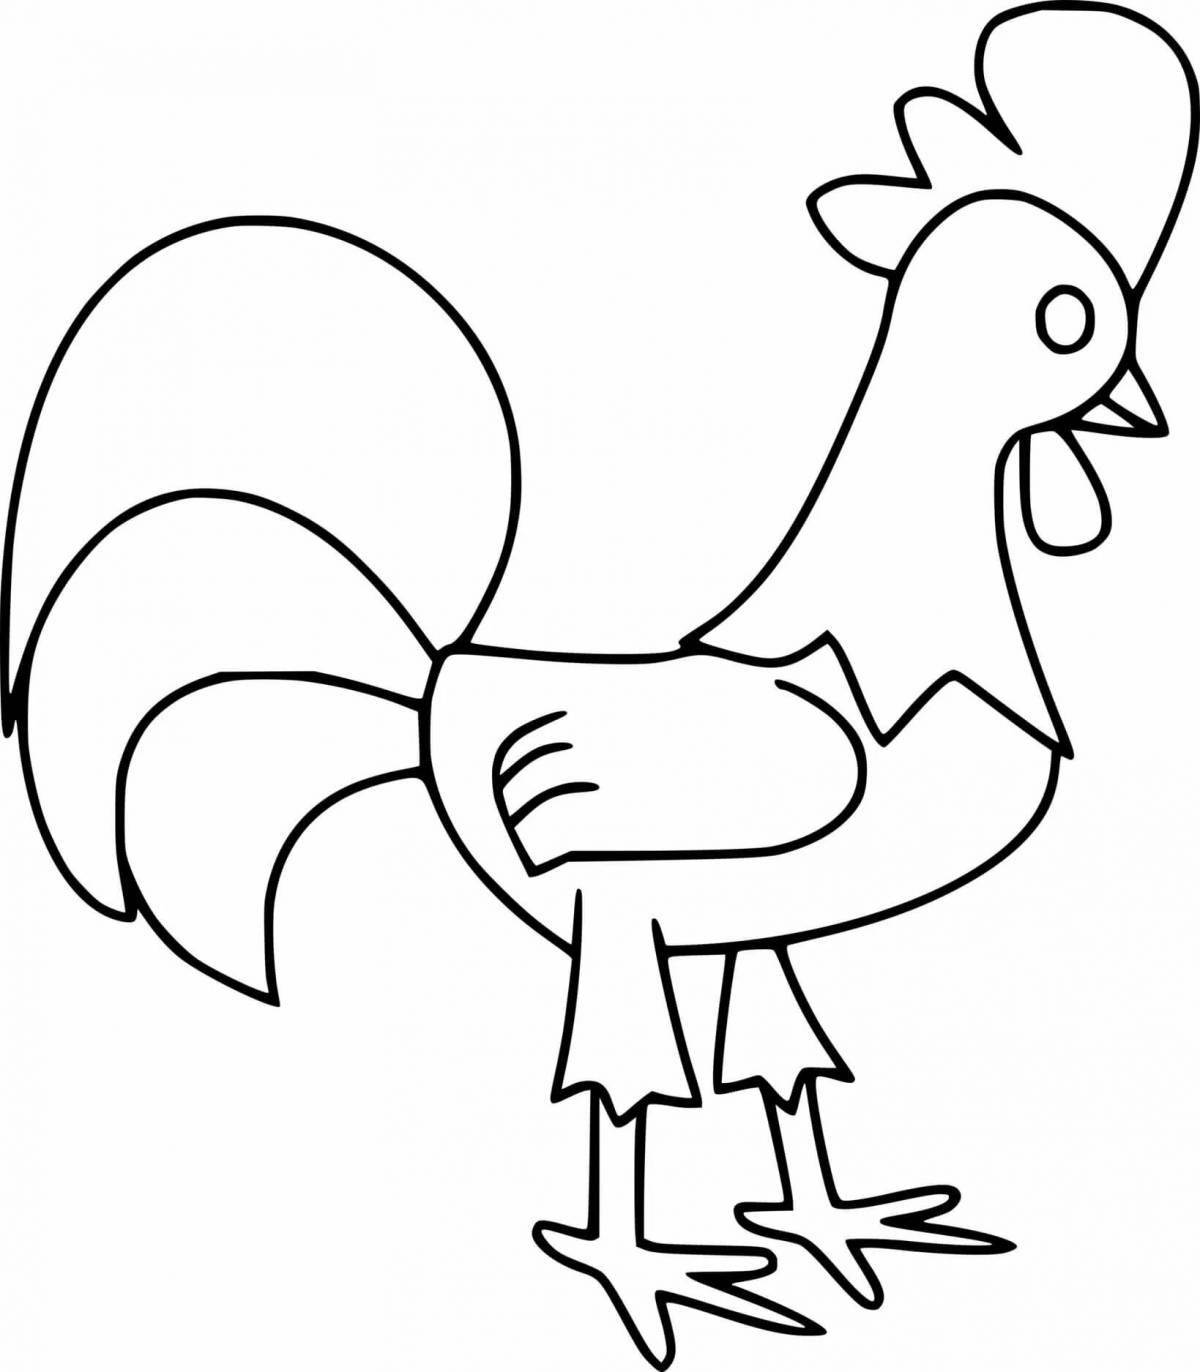 Fancy rooster coloring for kids